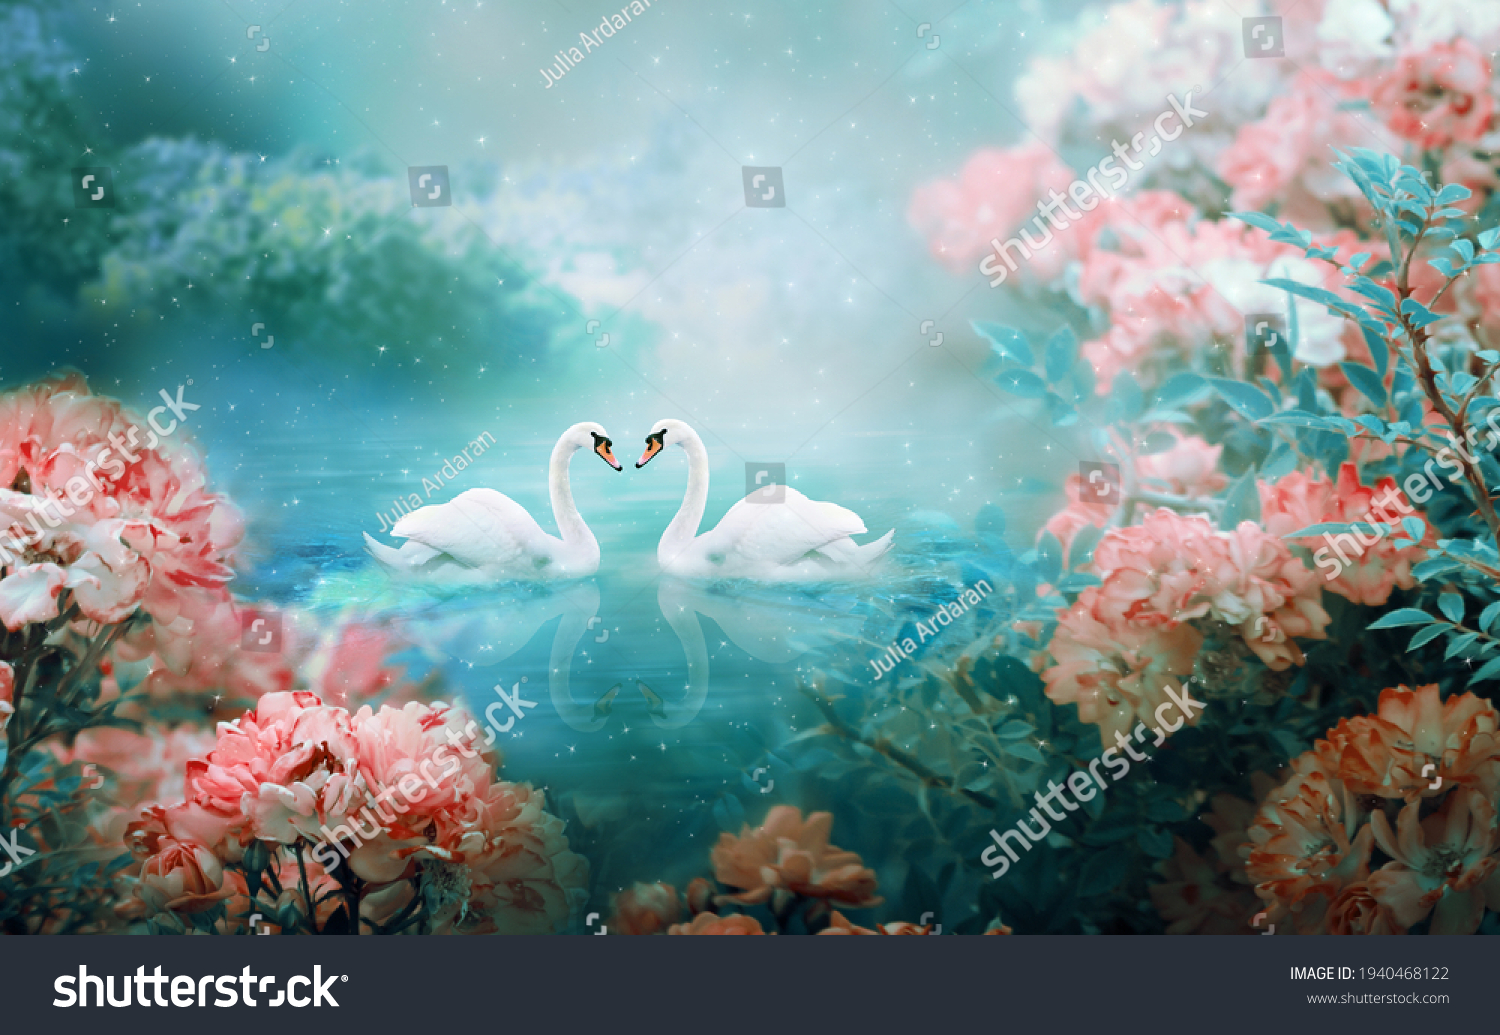 Two white swans couple swimming in lake, fantasy magical enchanted fairy tale landscape with elegant birds in love, fairytale blooming pink rose flower garden on mysterious blue background in night #1940468122